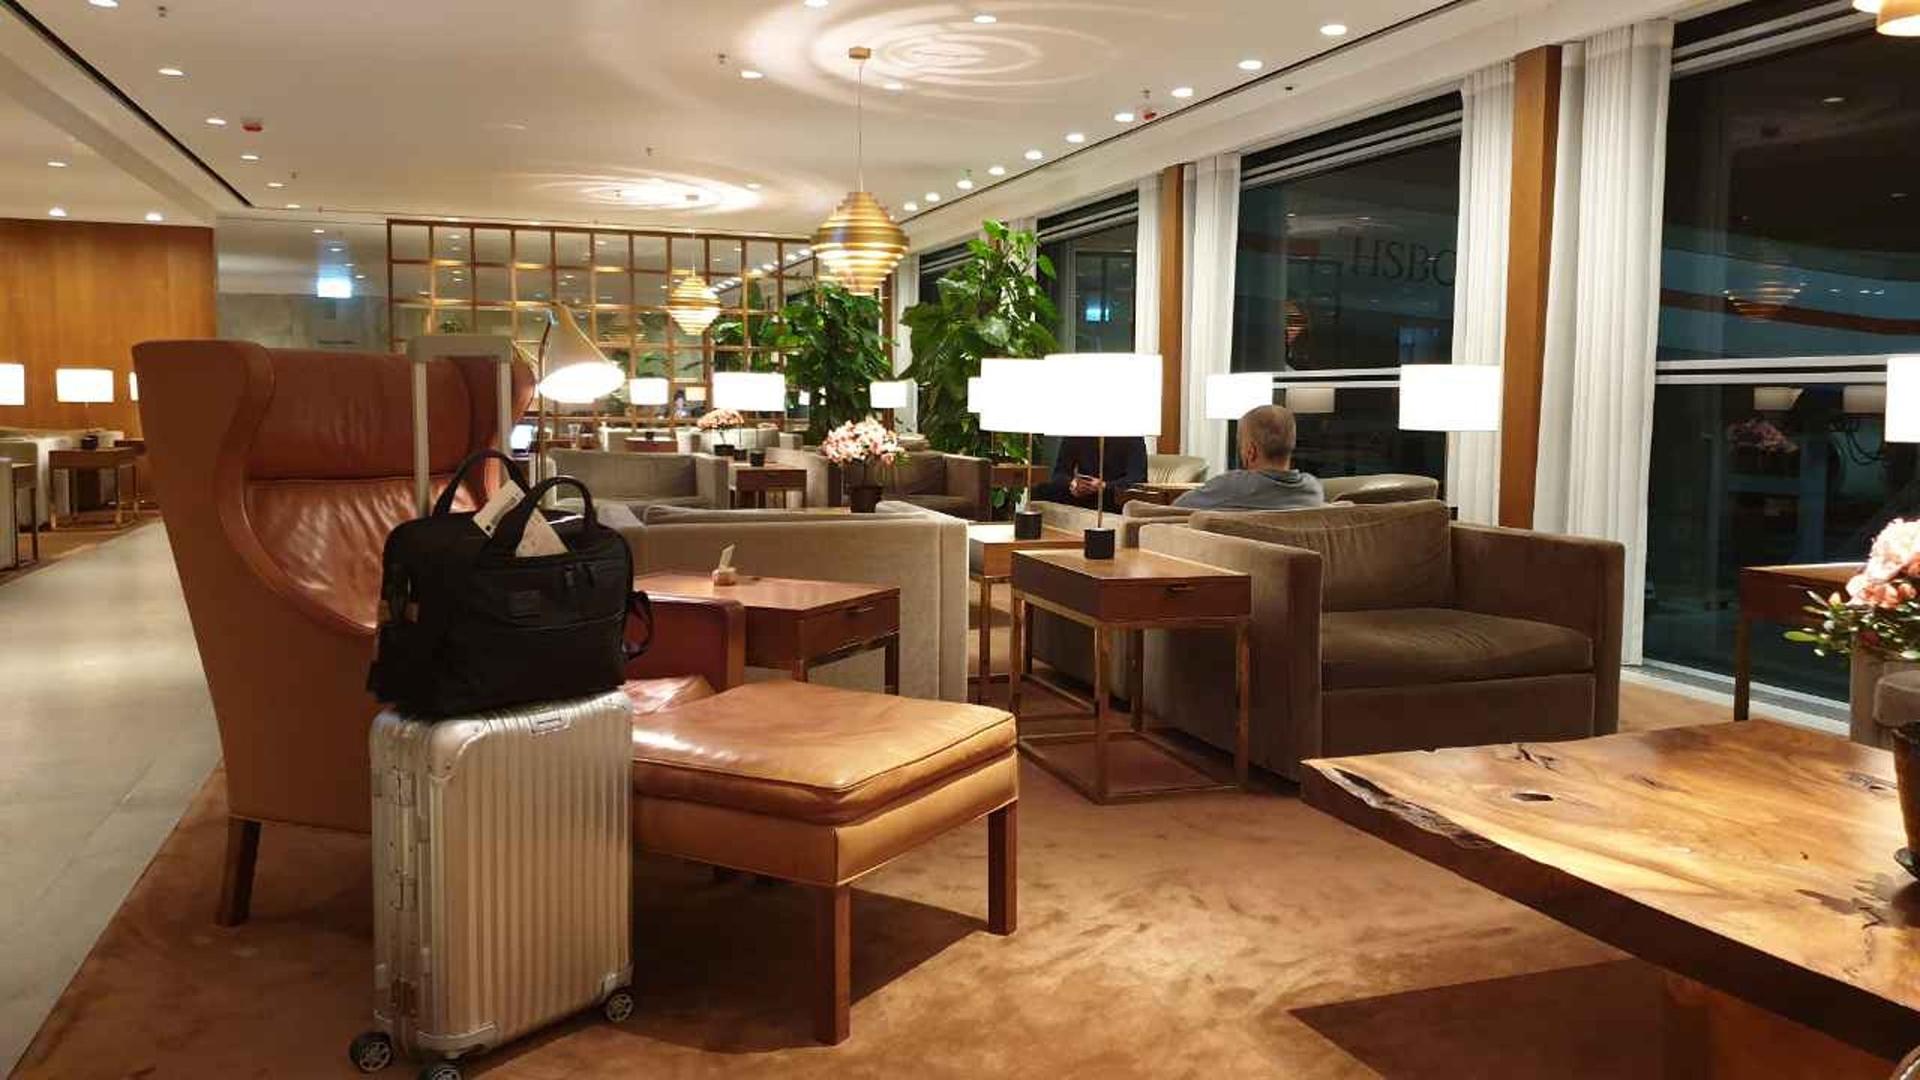 Cathay Pacific The Pier First Class Lounge image 52 of 100